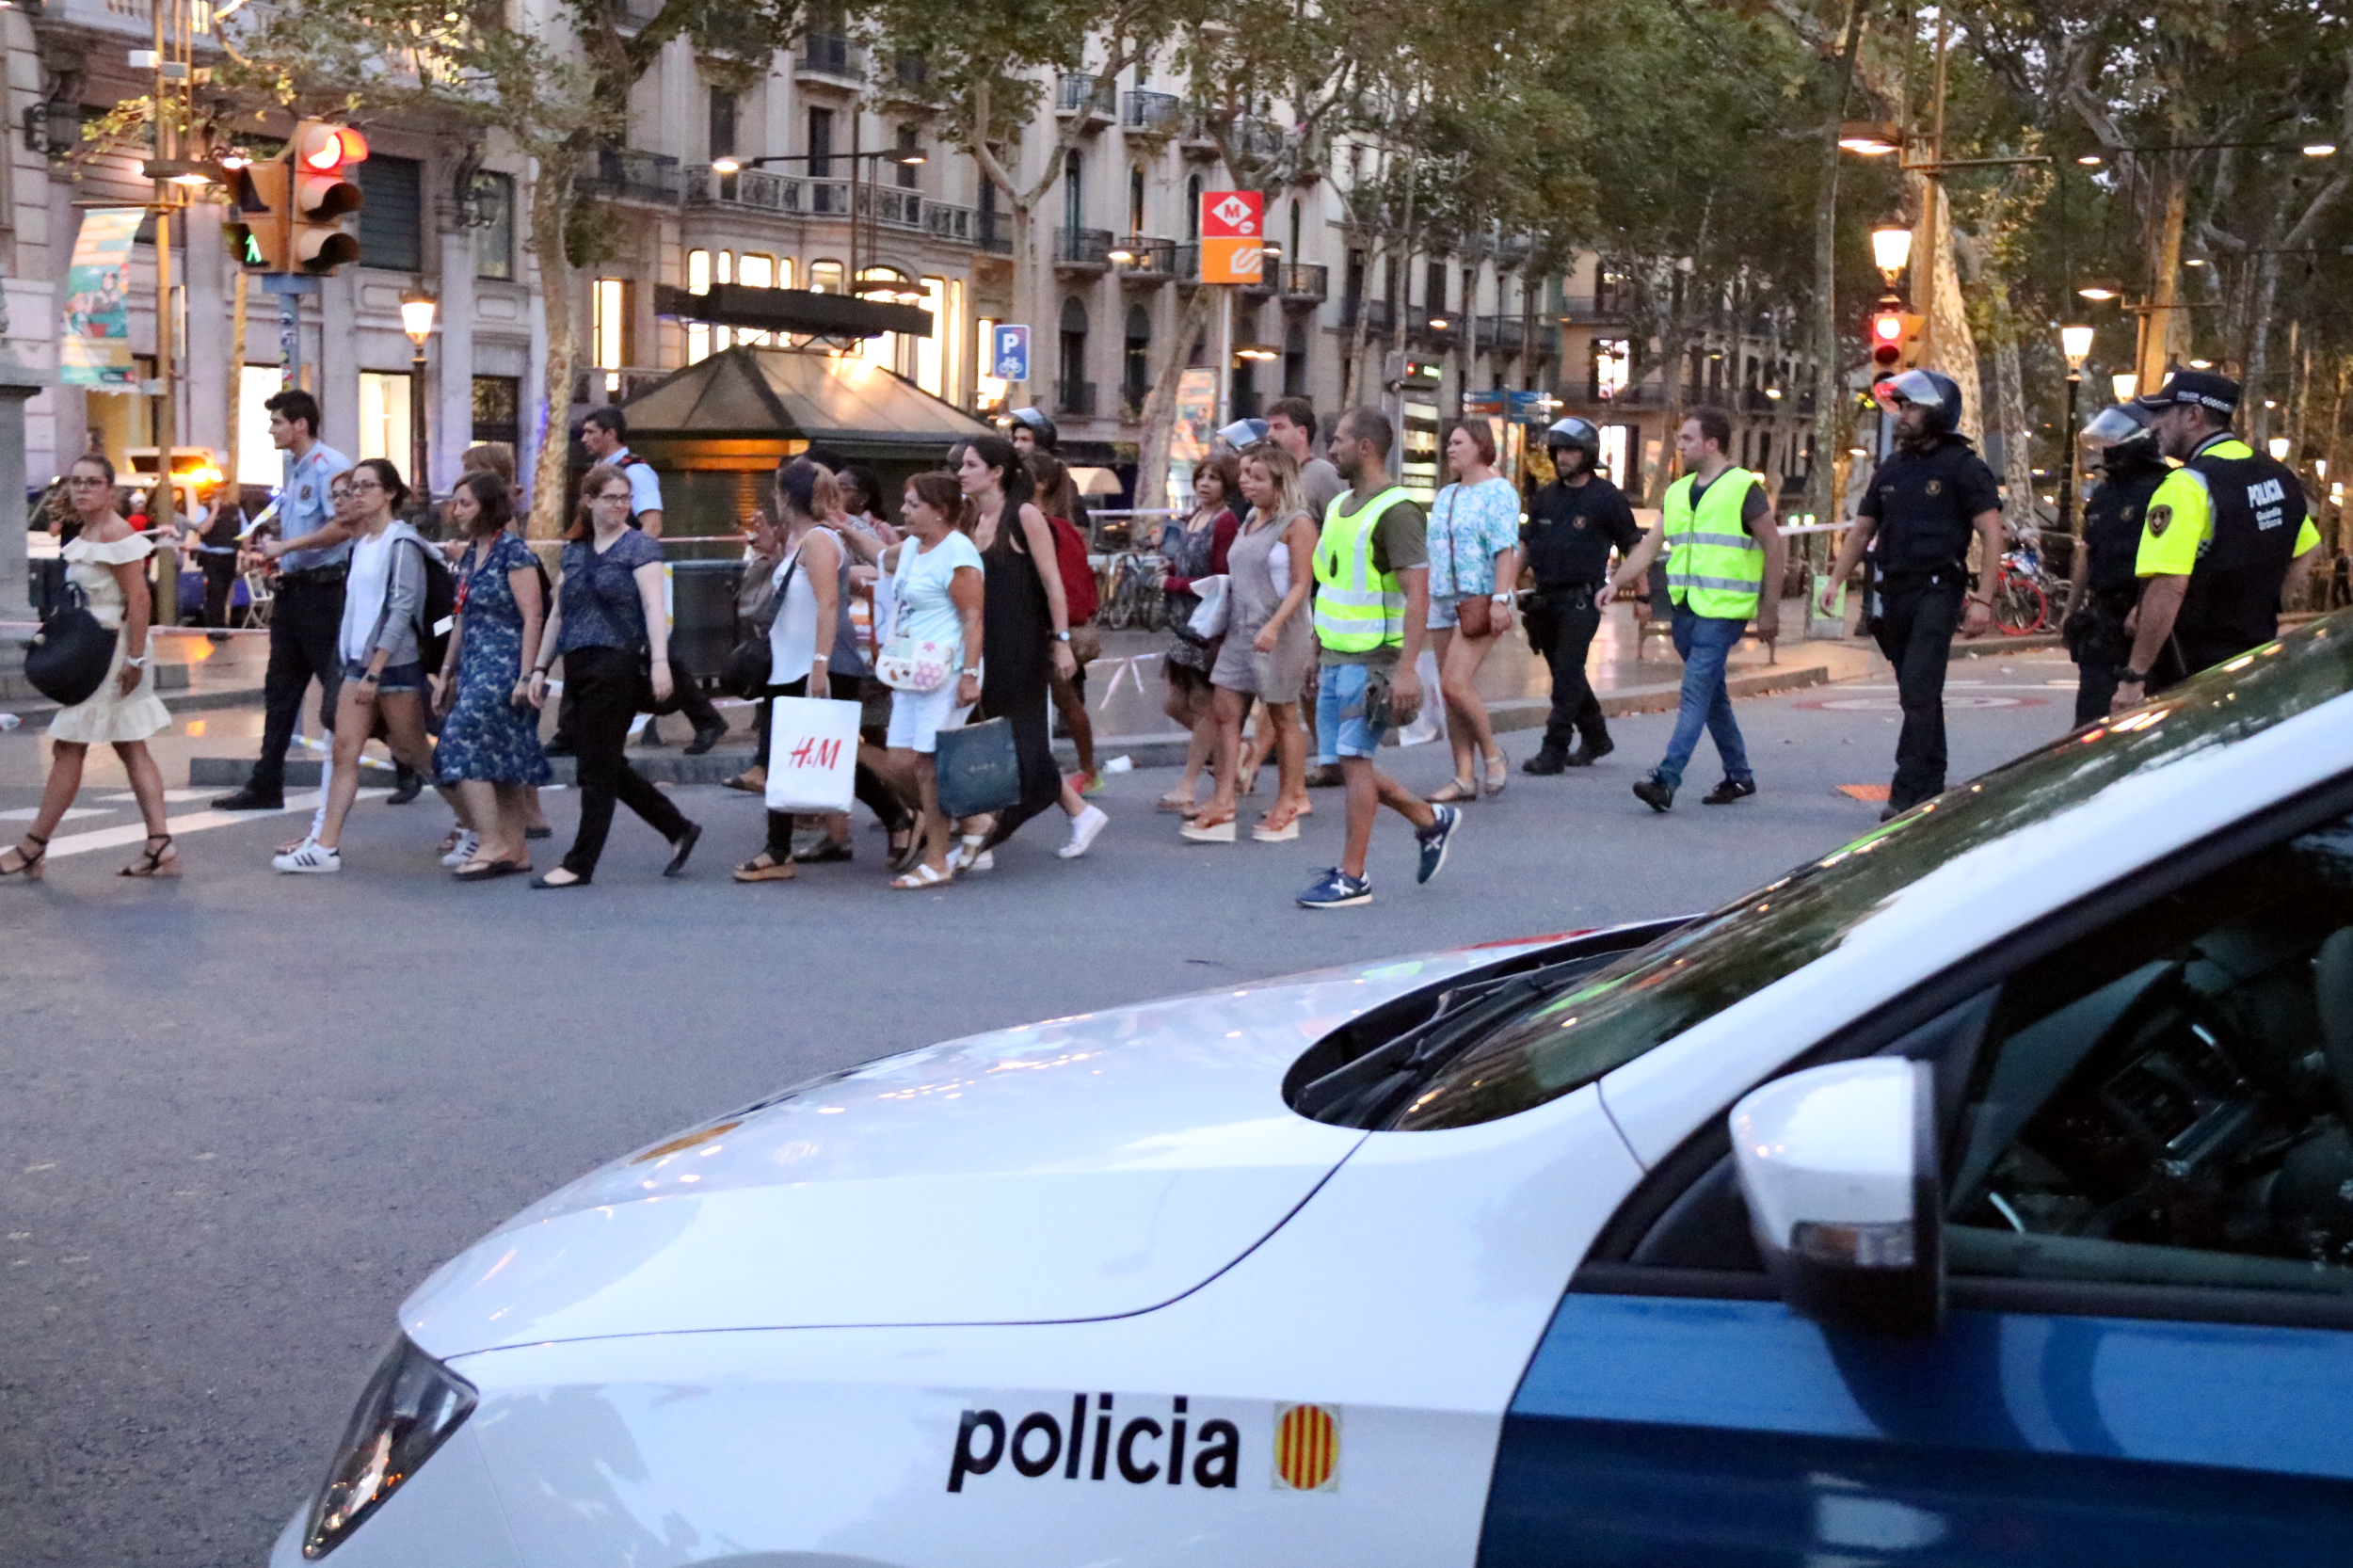 Police officers escort citizens away from the center of Barcelona after the attacks on August 17 (by Núria Julià)